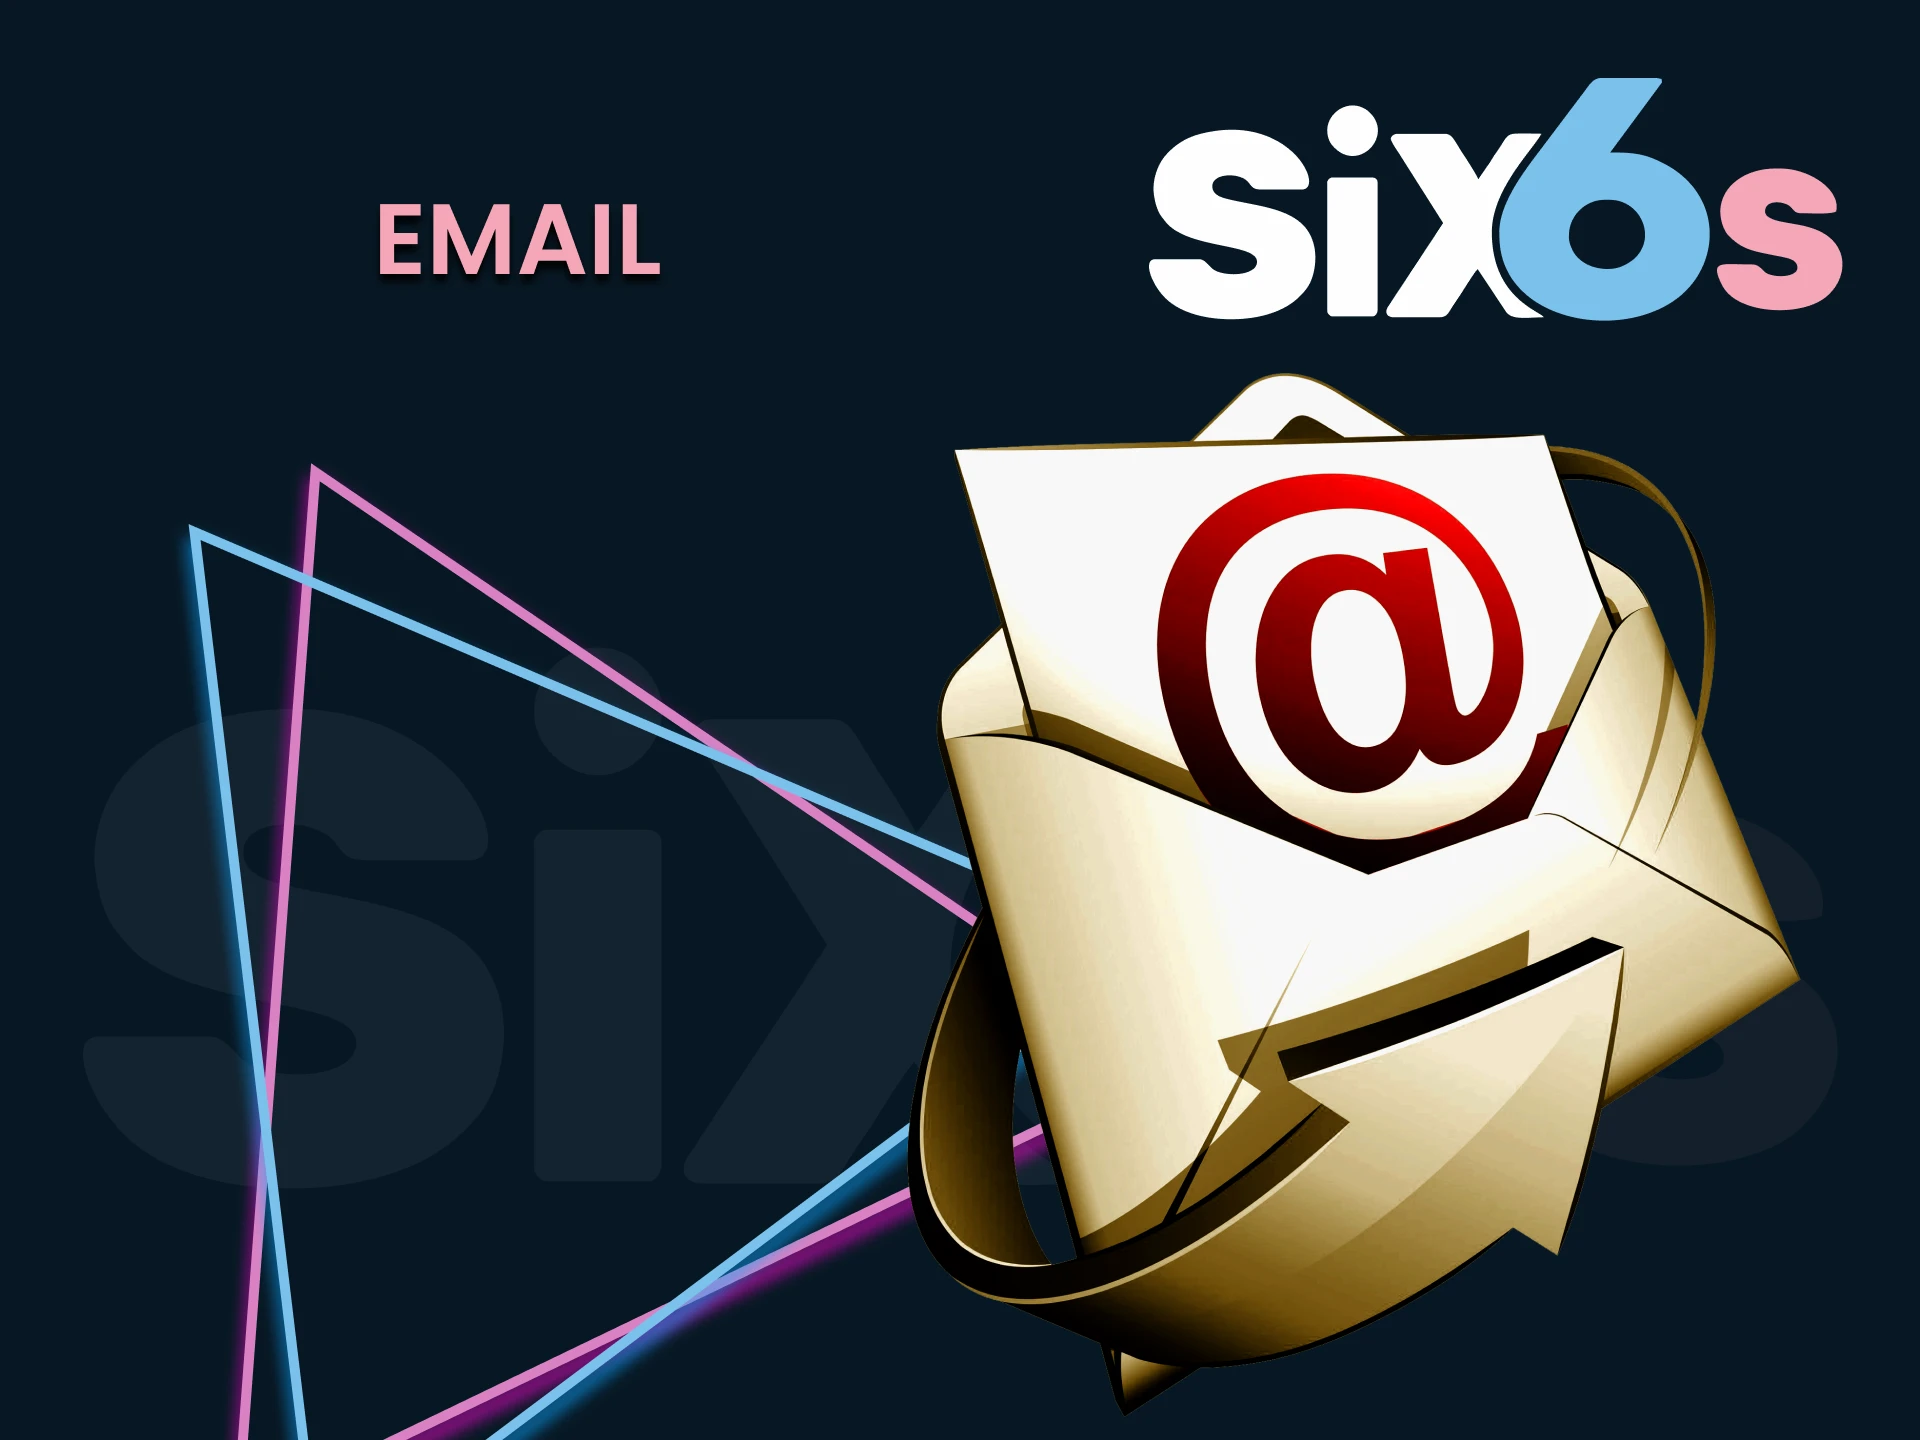 Use Email to contact Six6s.